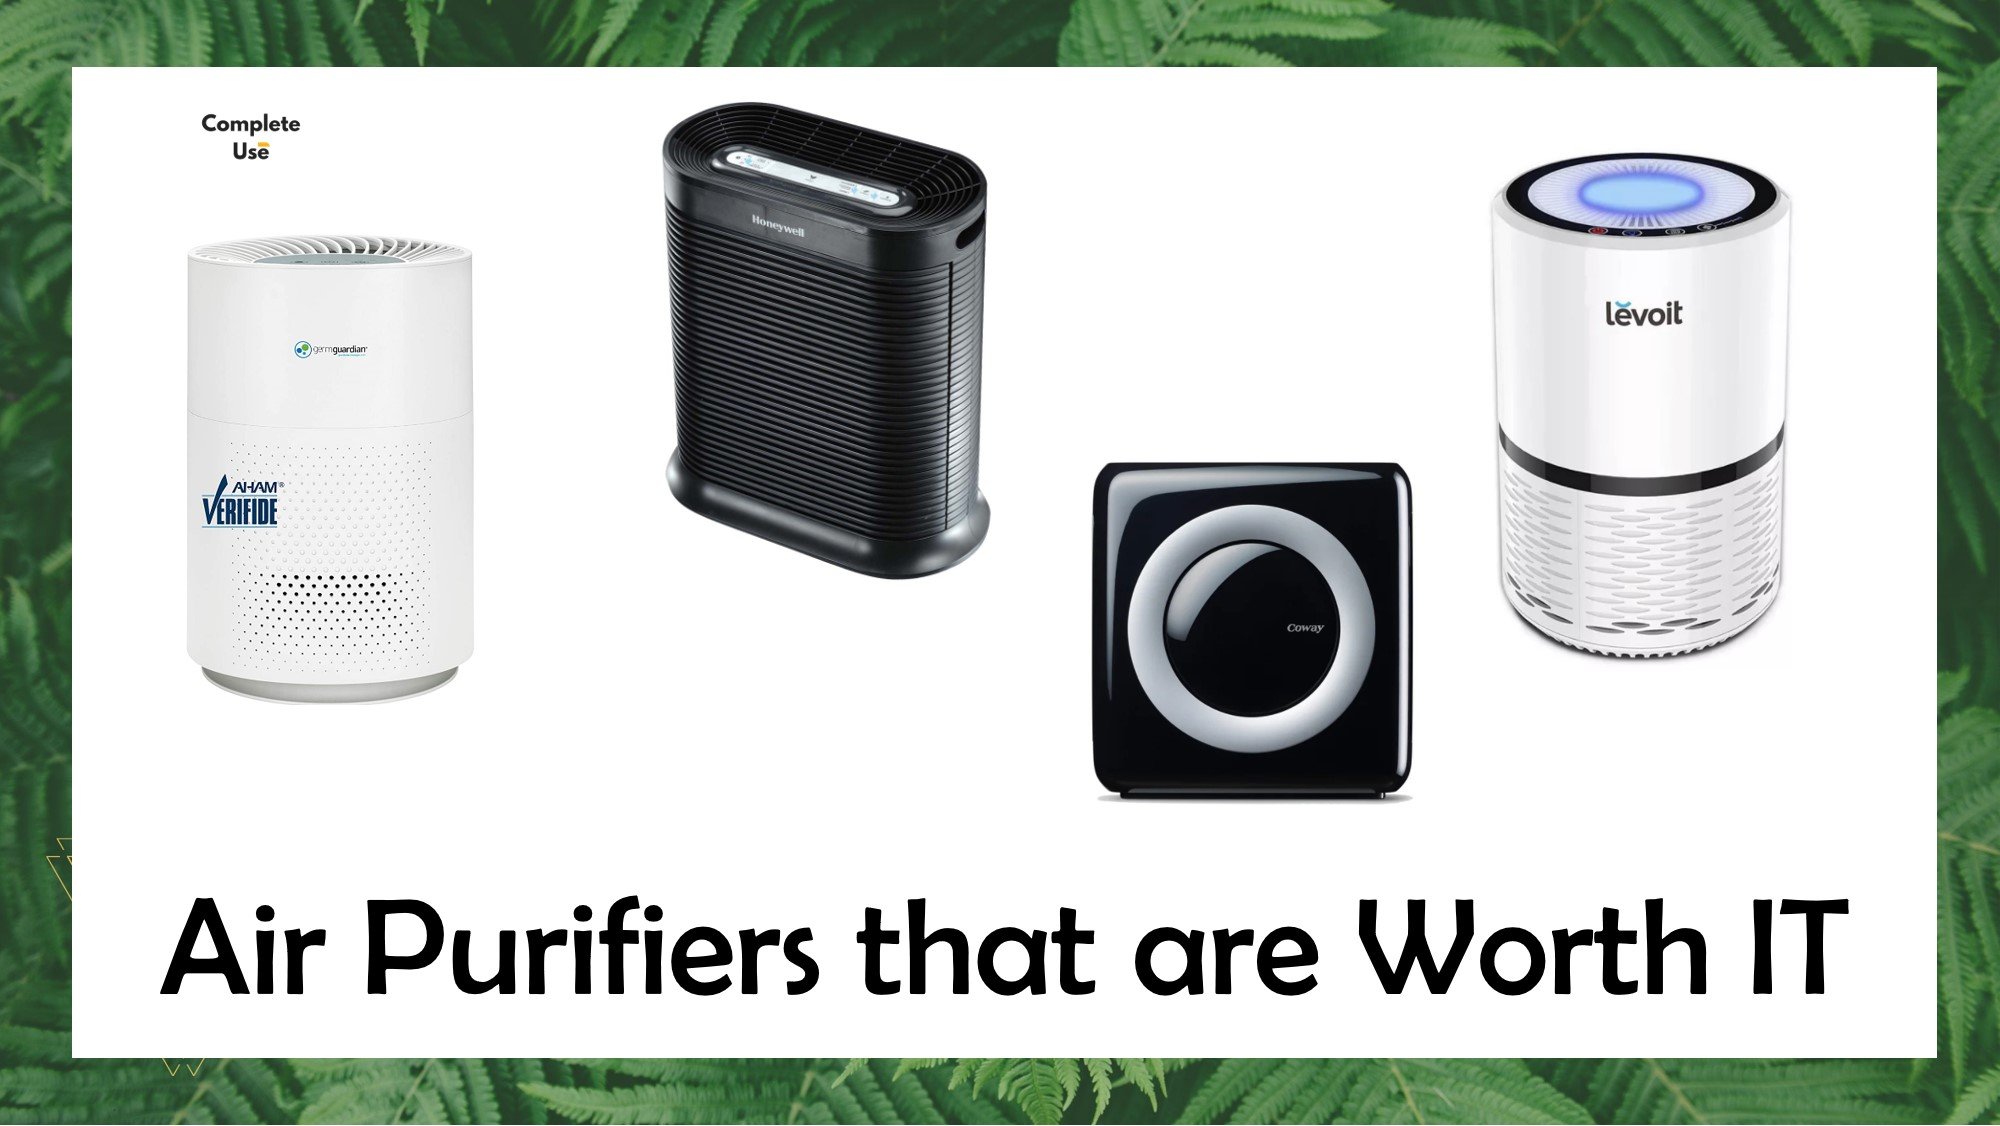 The Air Purifiers That Are Worth It - According to Reddit